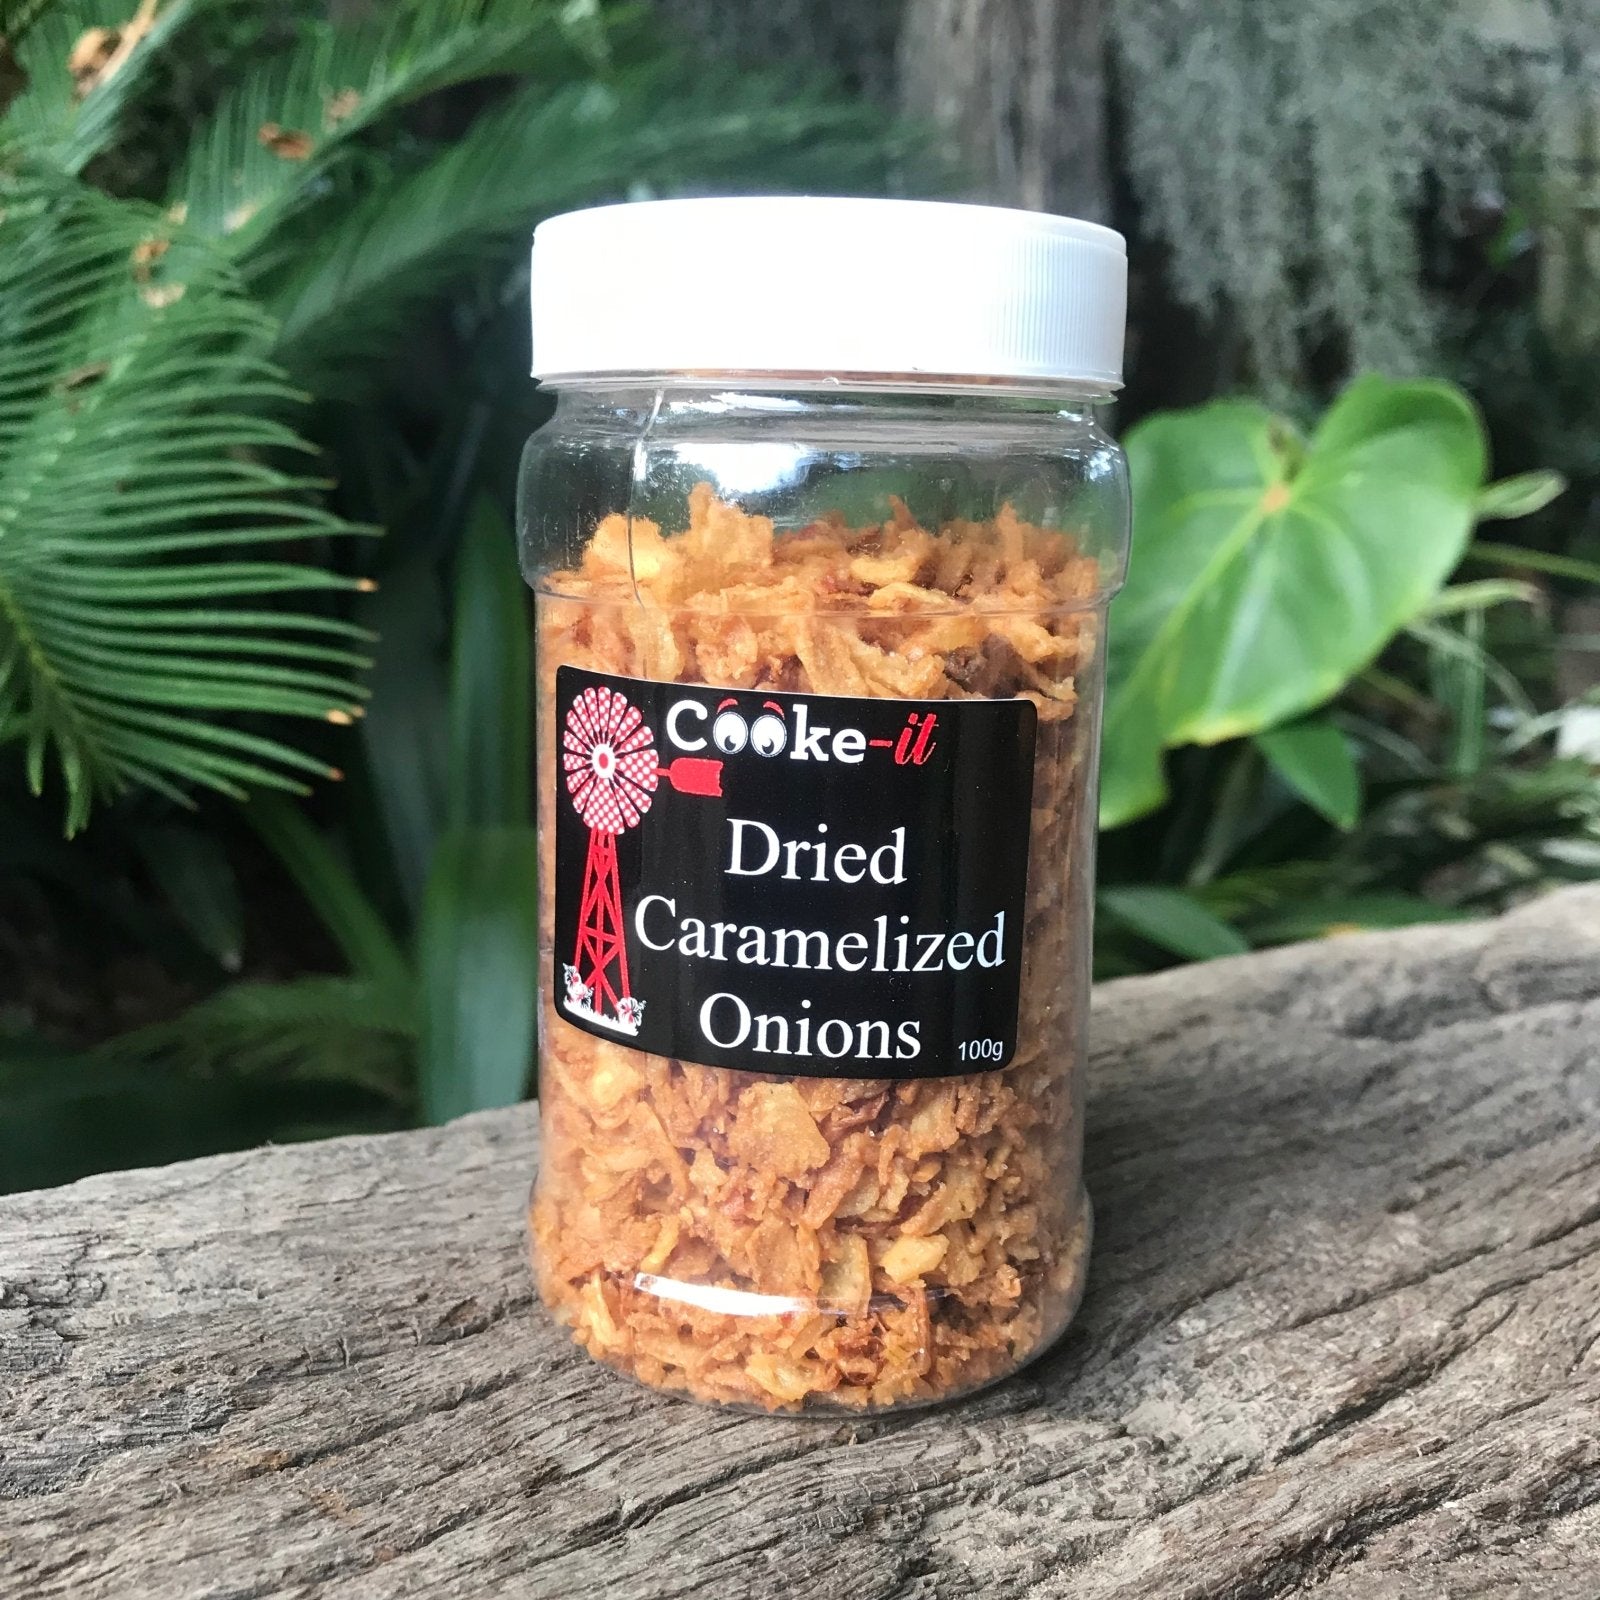 Dried Caramelized Onions (100g) - The Deli